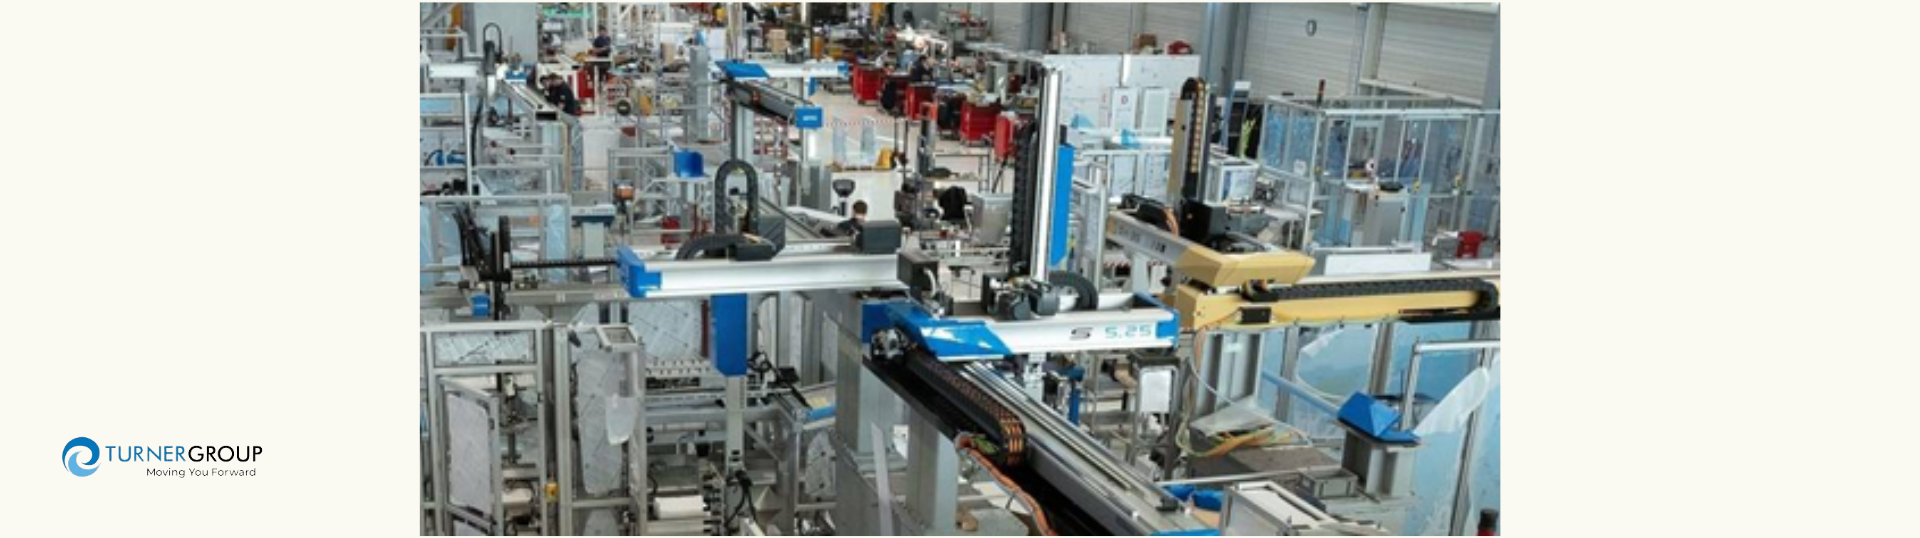 Automation in the Plastics Industry